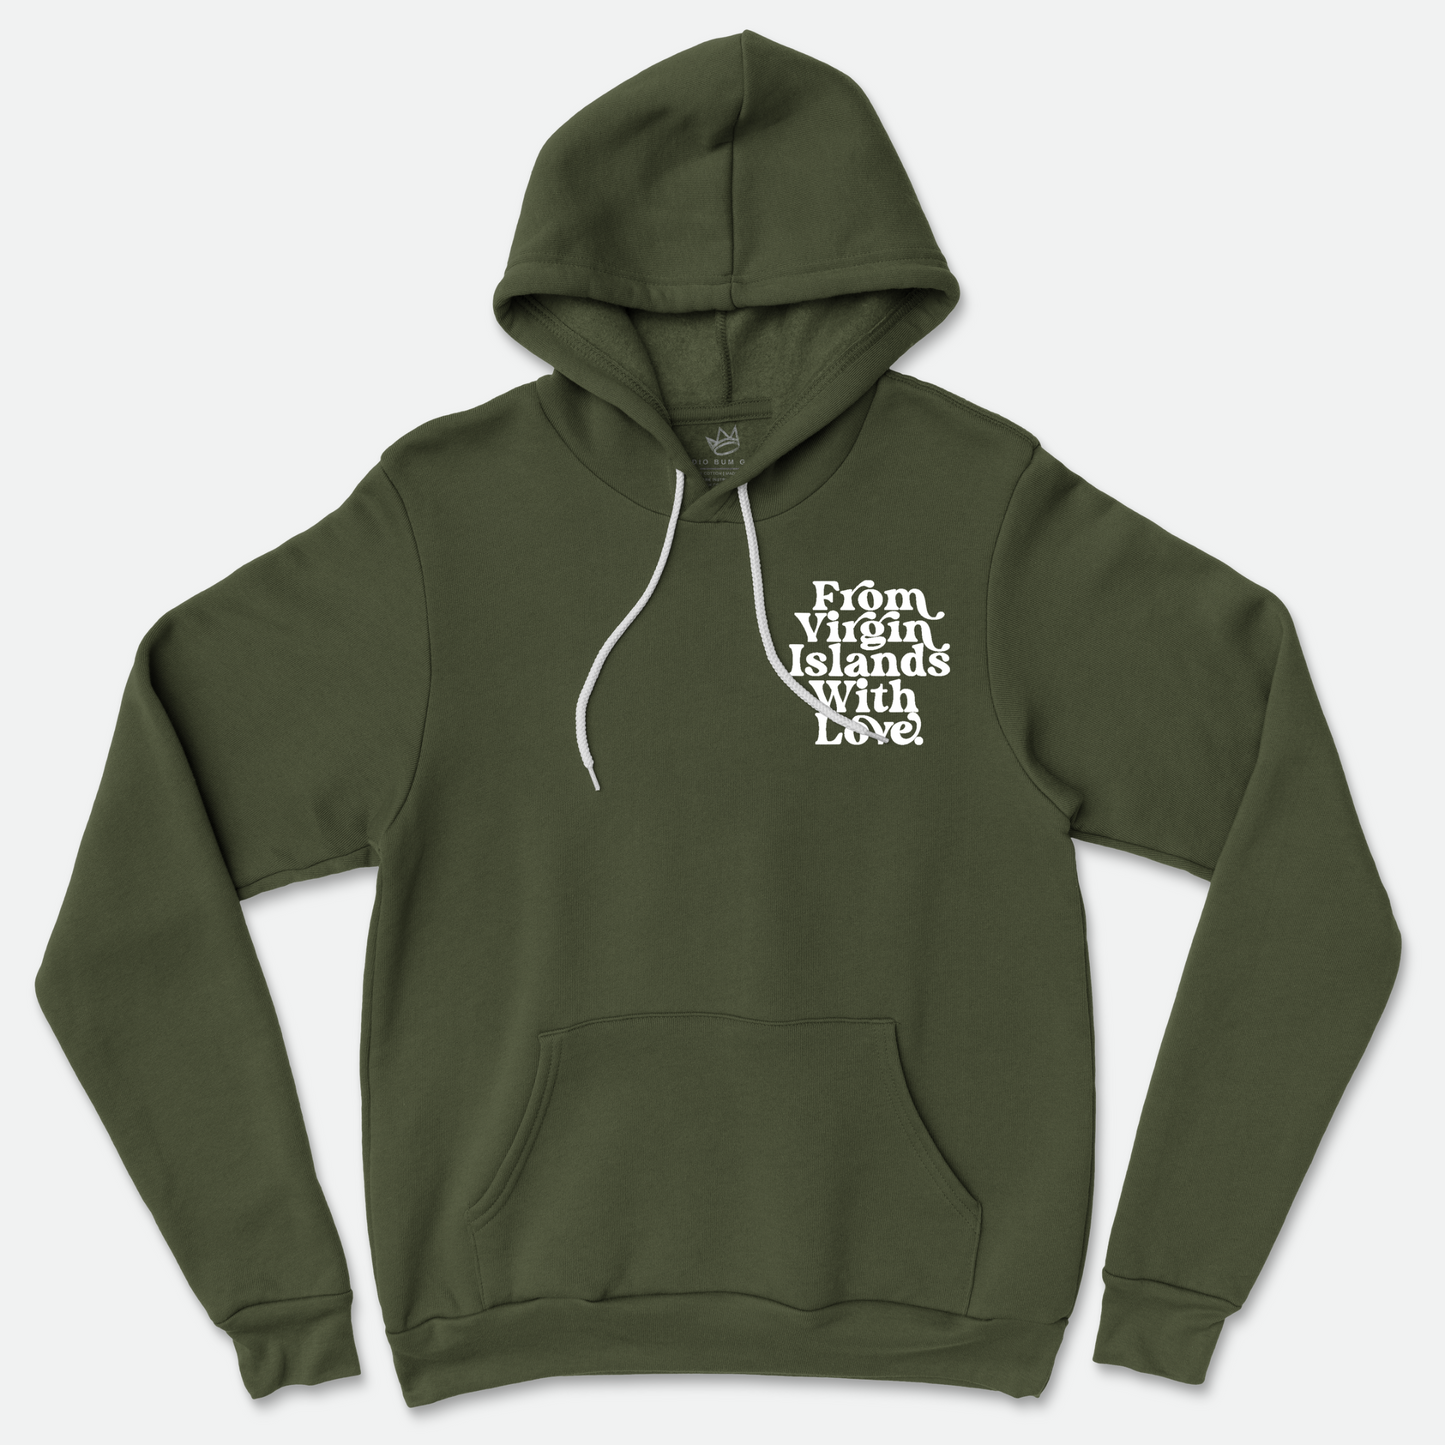 From Virgin Islands With Love Hoodie (White Print)